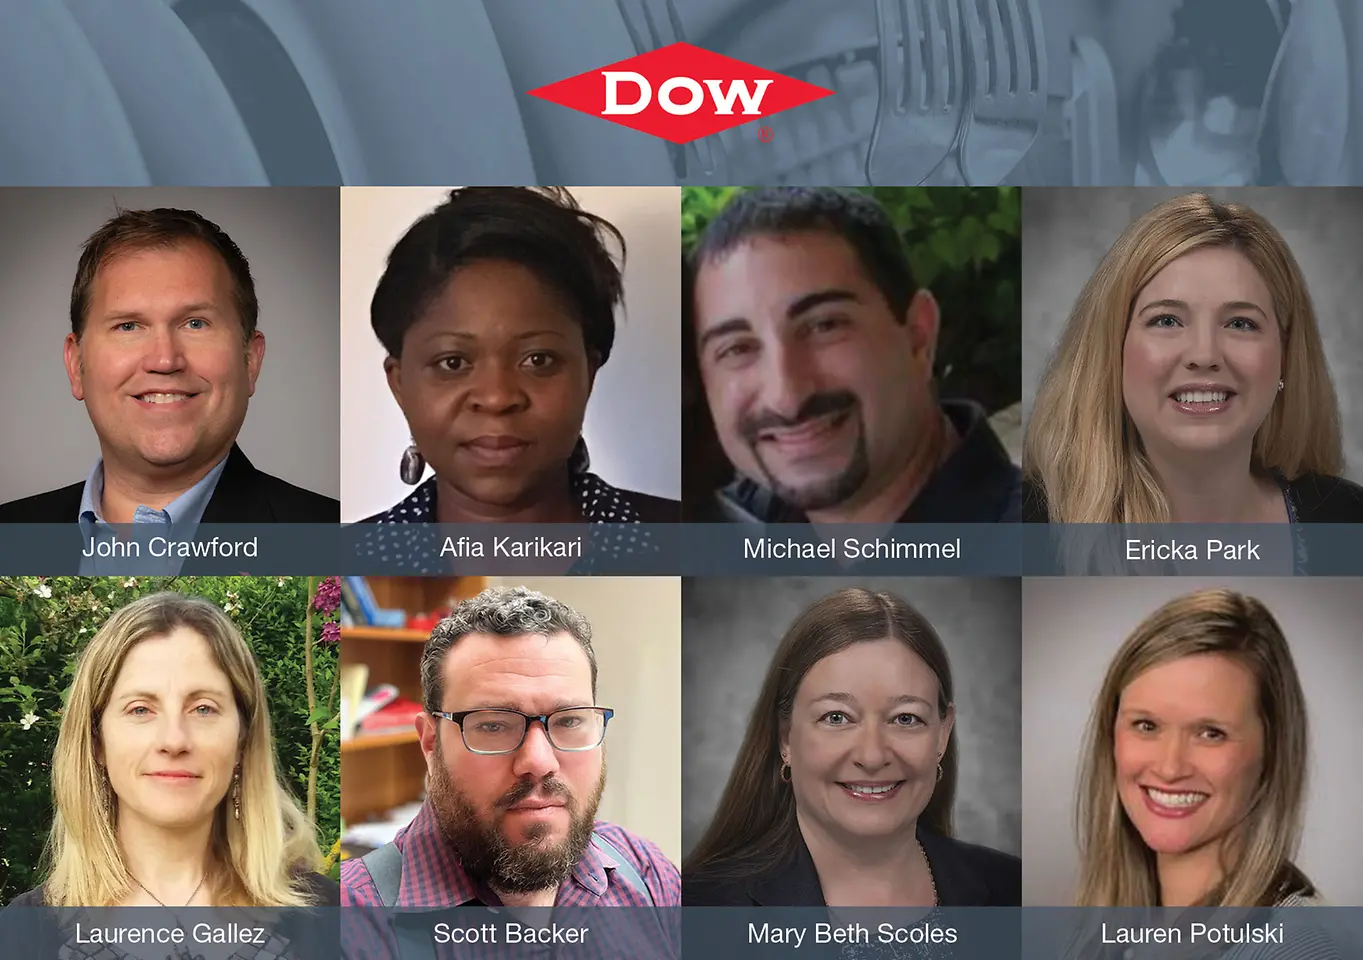 
Dow was honored as runner-up for developing a new high-performance ingredient that enables compaction and improves anti-spotting in automatic dishwashing products in North America.